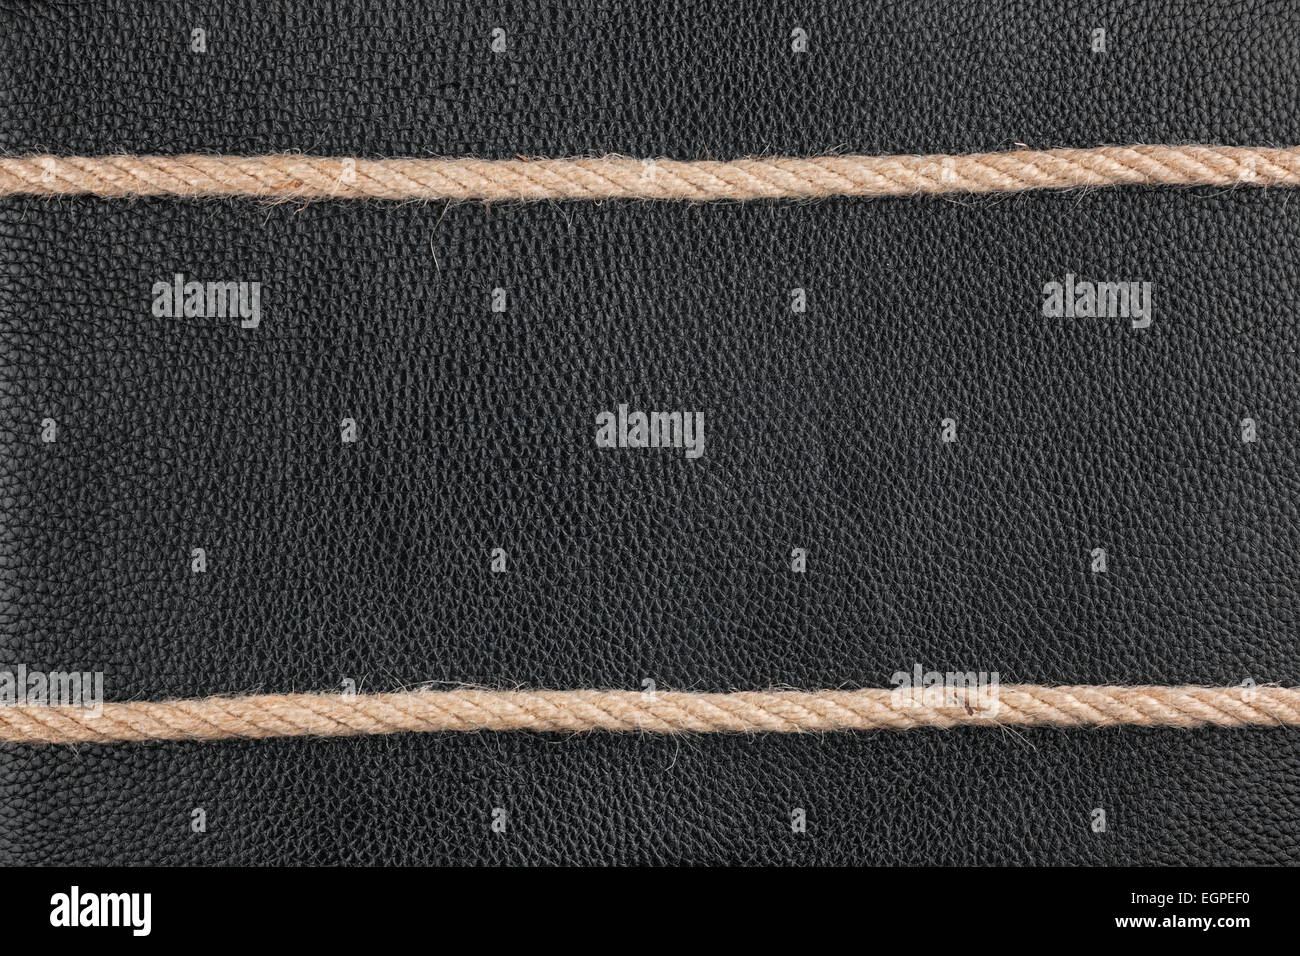 The two ropes lie on natural leather, with space for text Stock Photo